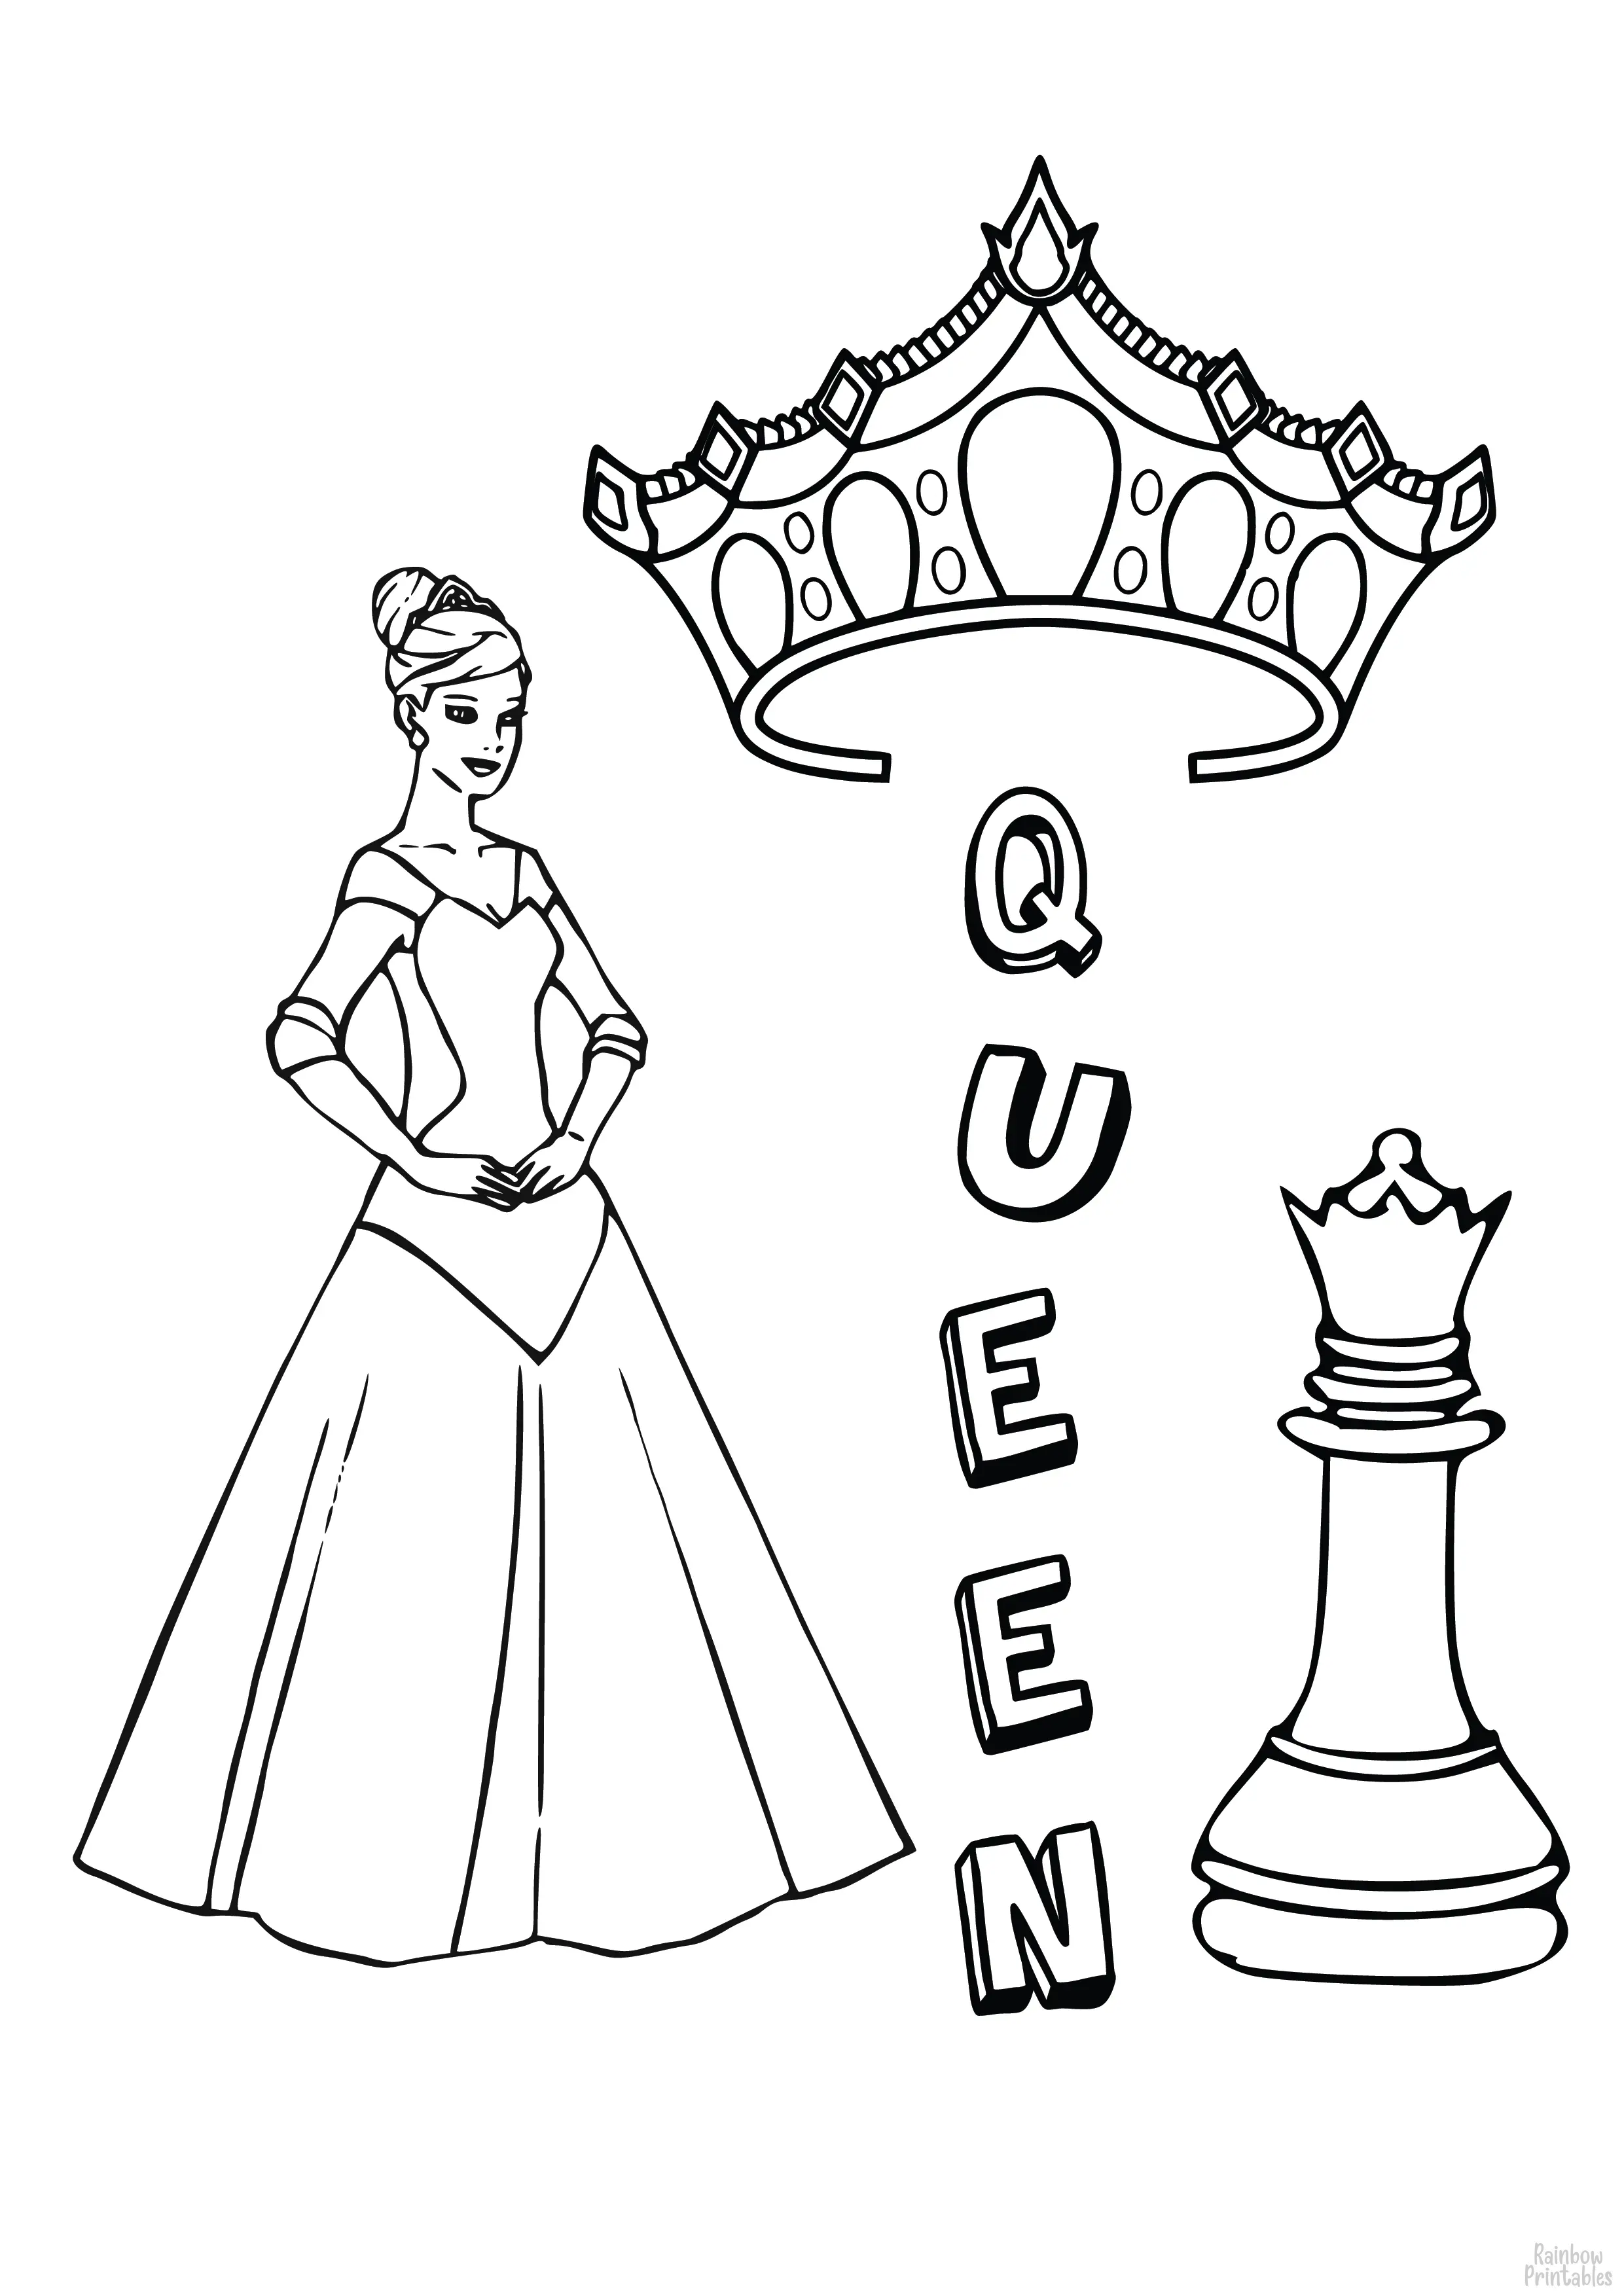 QUEEN CROWN CHESS PIECE Free Clipart Coloring Pages for Kids Adults Art Activities Line Art